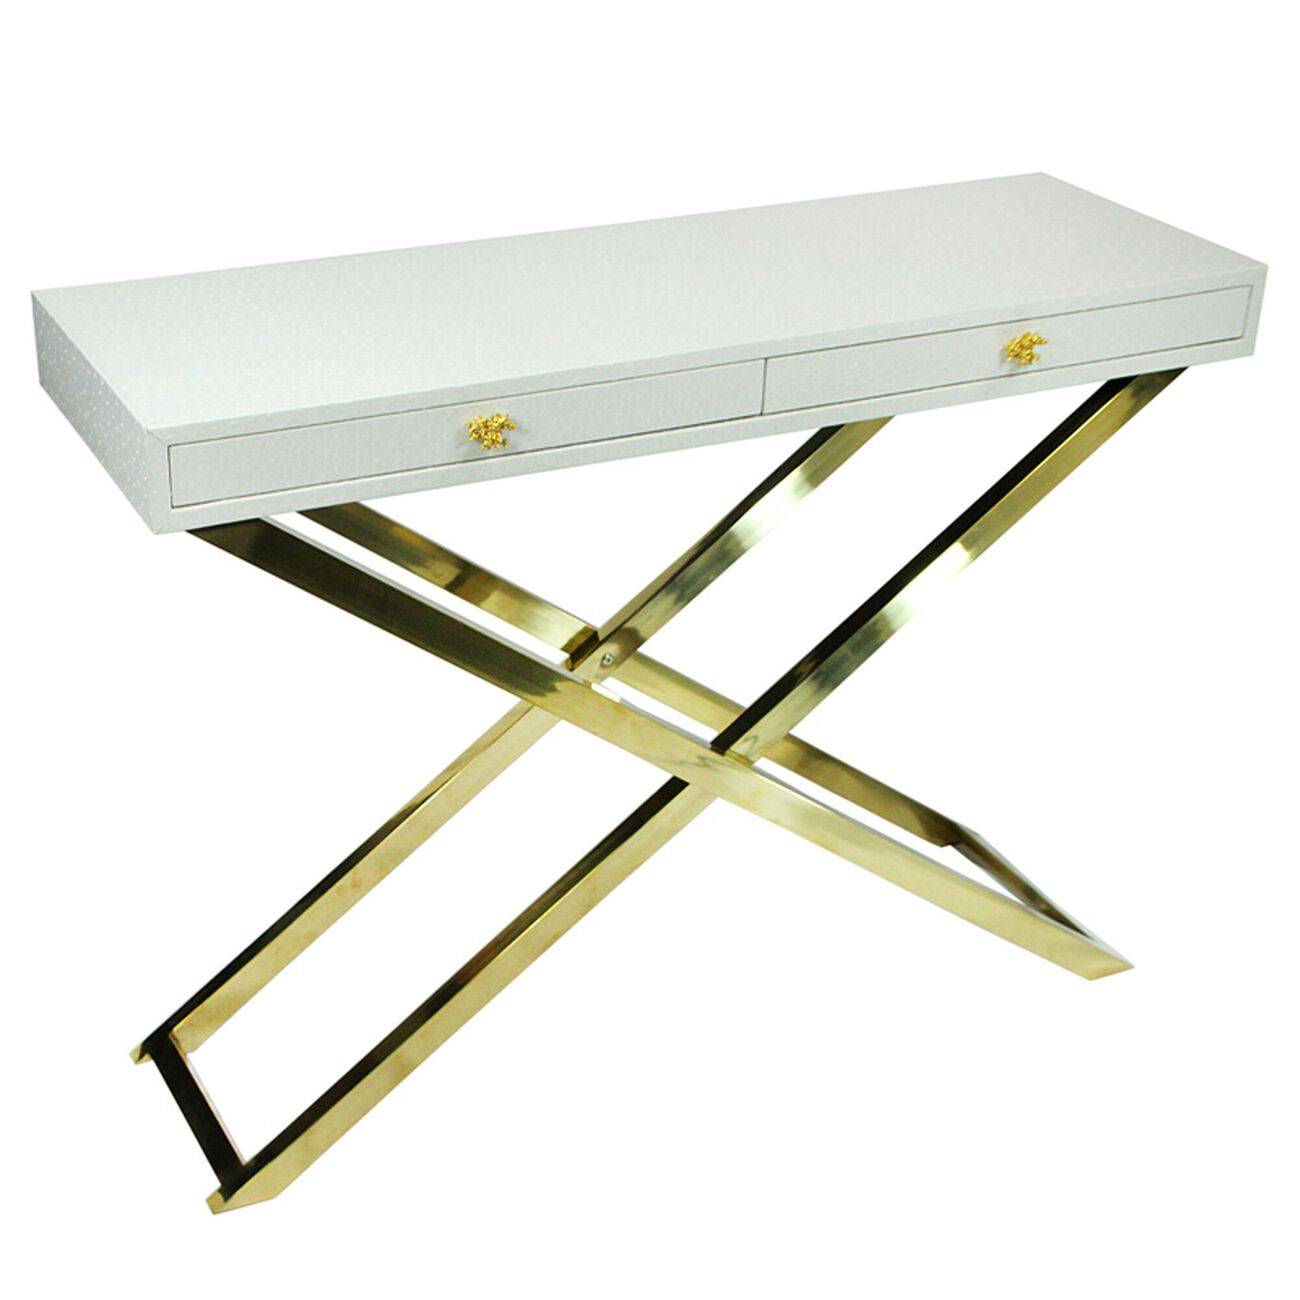 Wood and Metal Folding Console Table with 2 Drawers, White and Gold